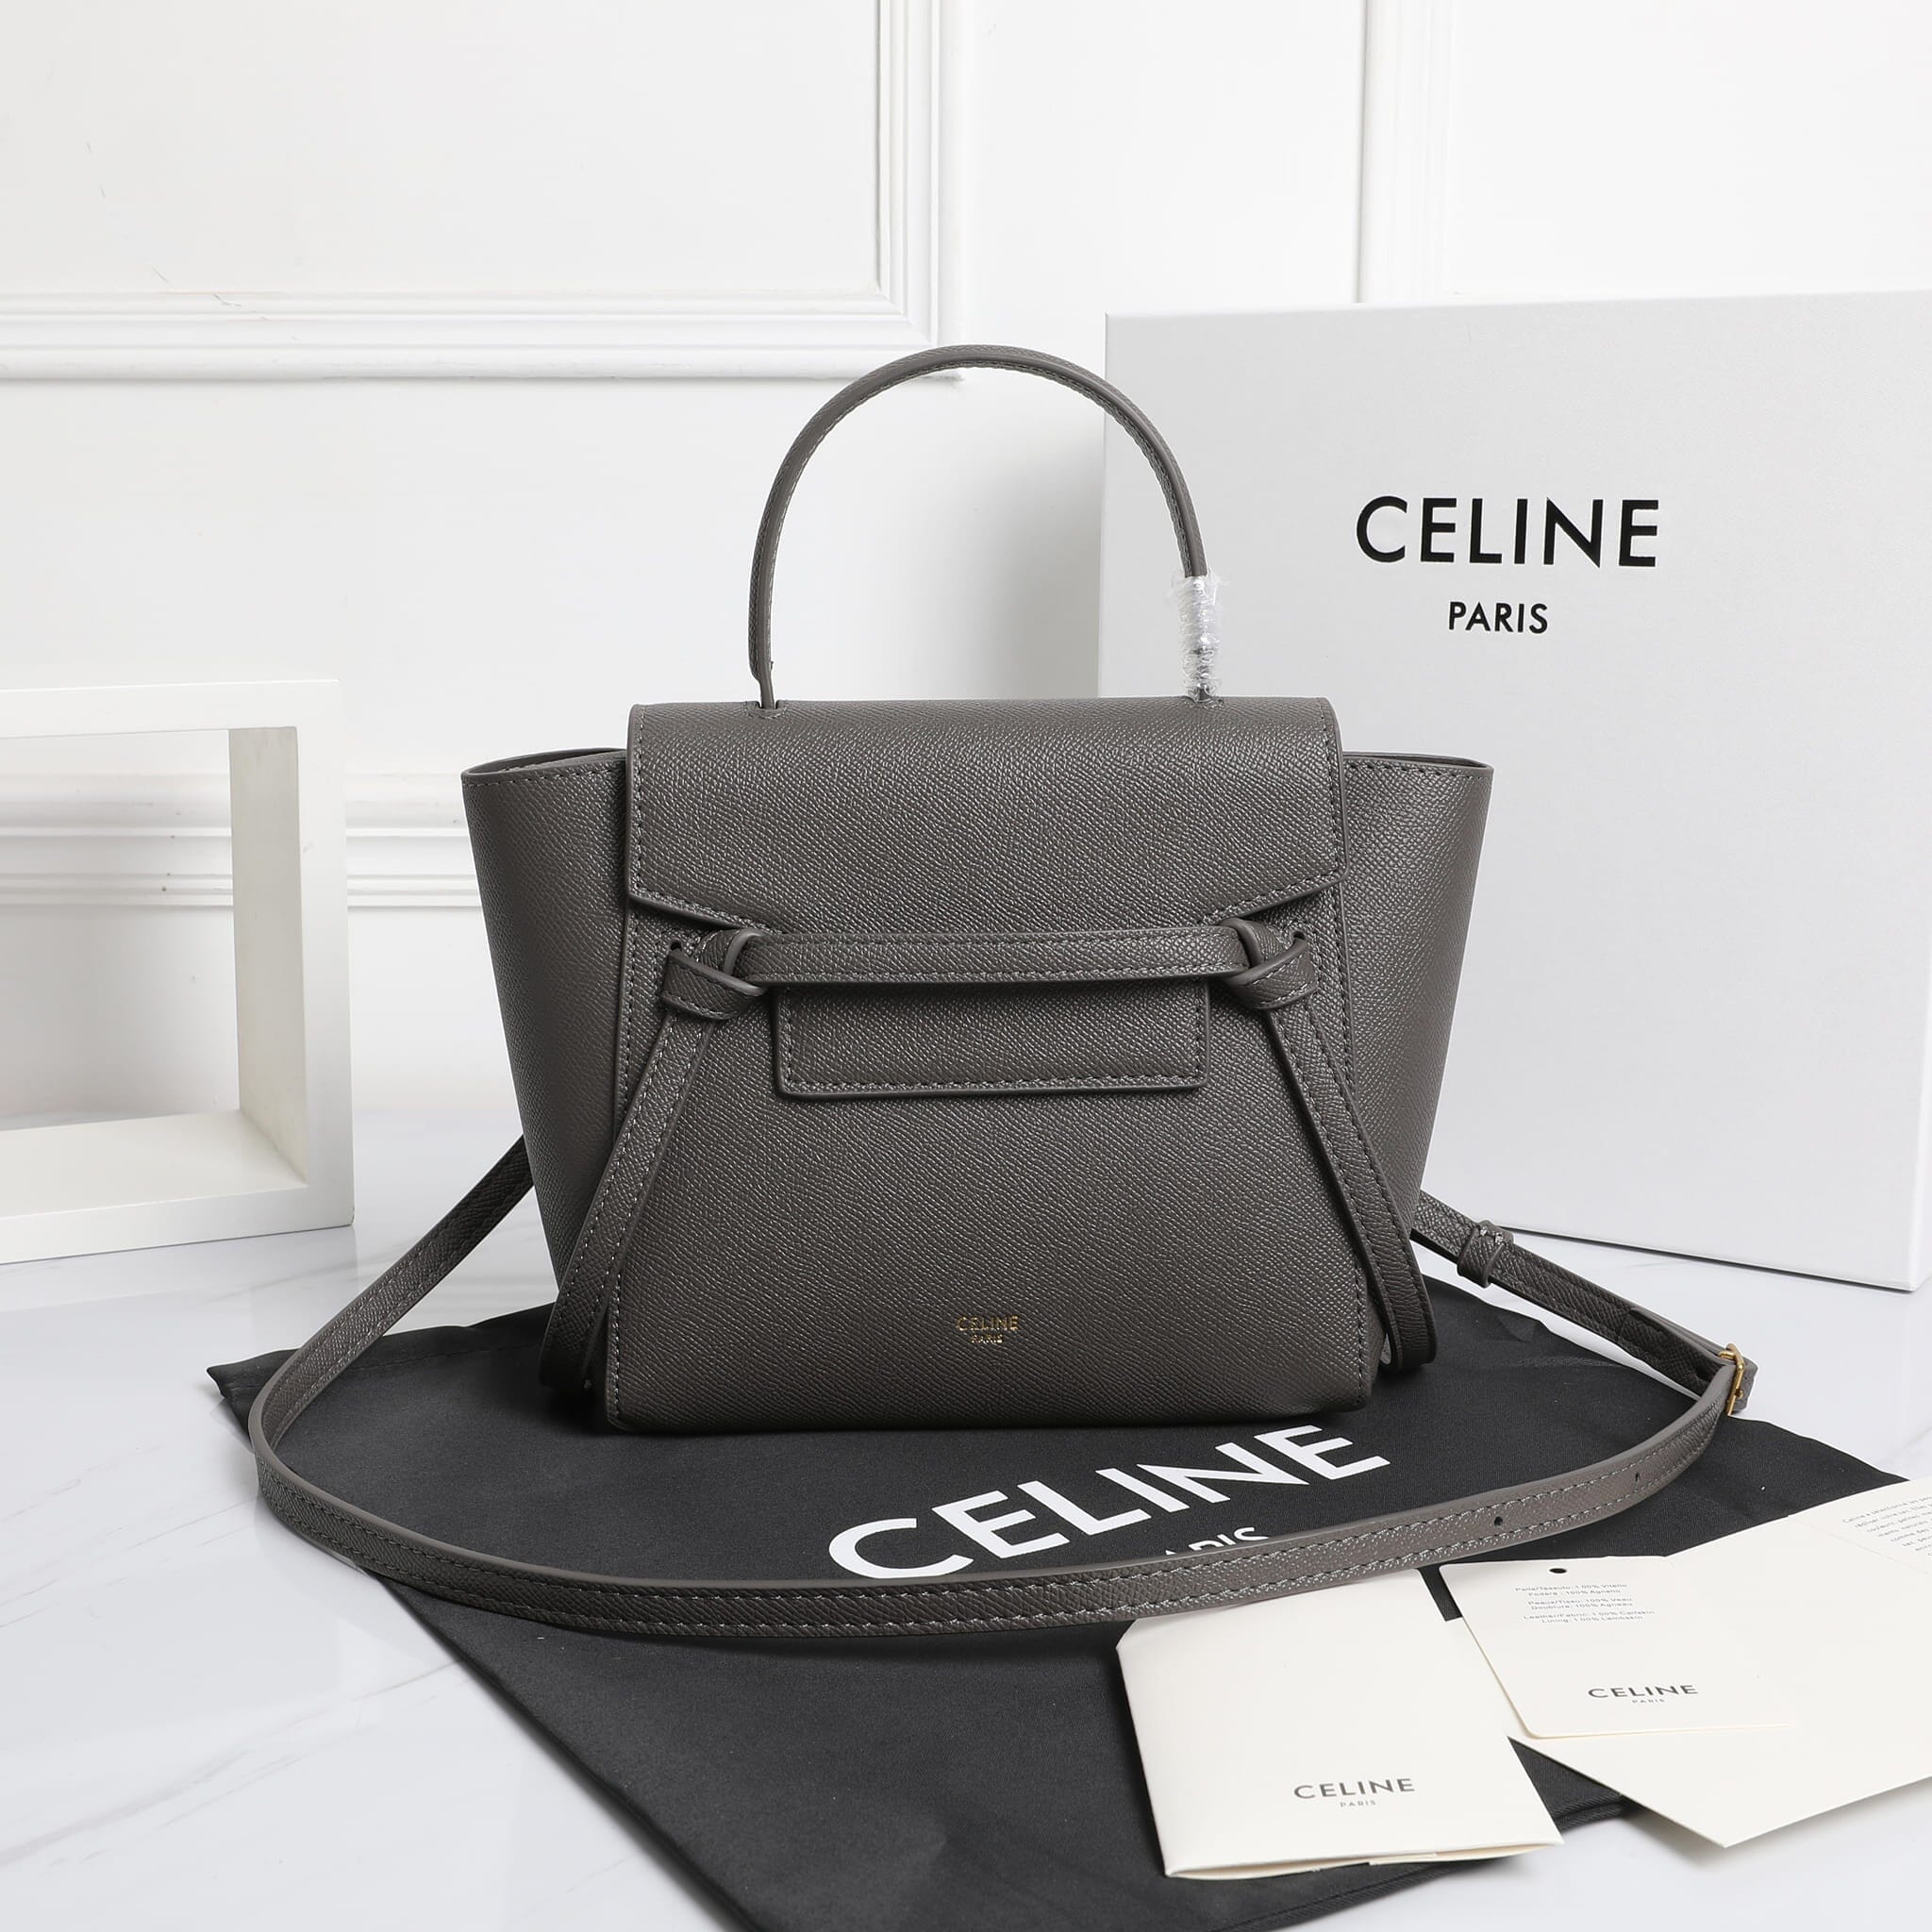 CLN - CLN is the new Celine! Serving you nationwide!